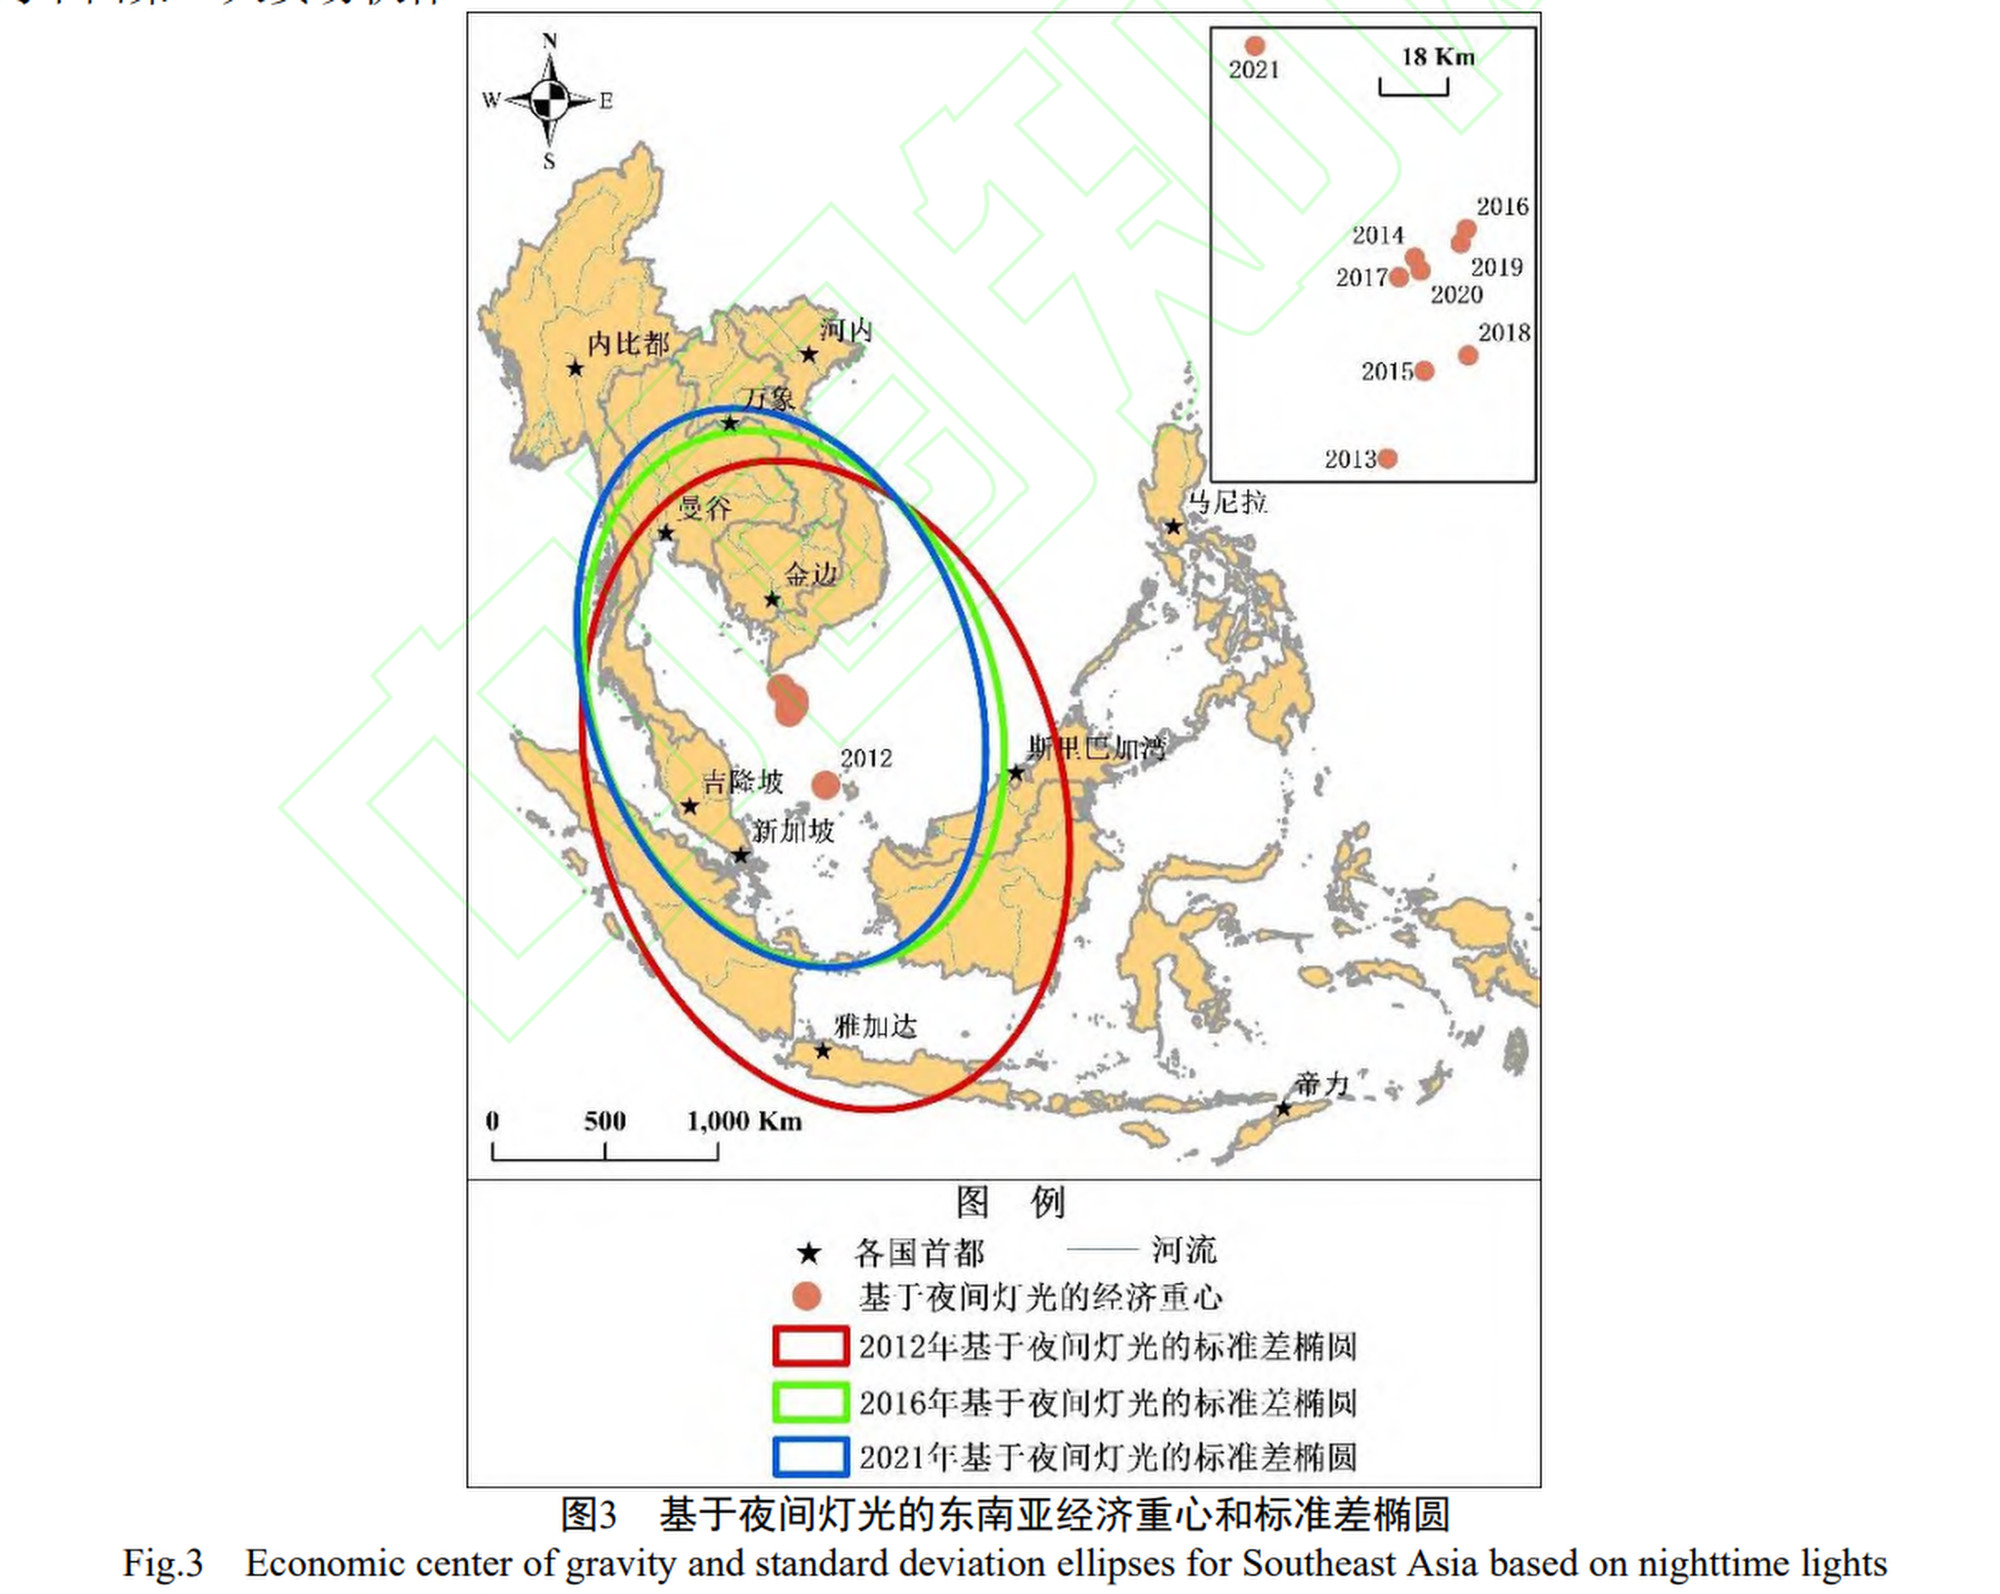 Satellite data shows the gravitational centre of artificial light in Southeast Asia has been moving northward towards China over the past decade, according to the study. Illustration: Yunnan University